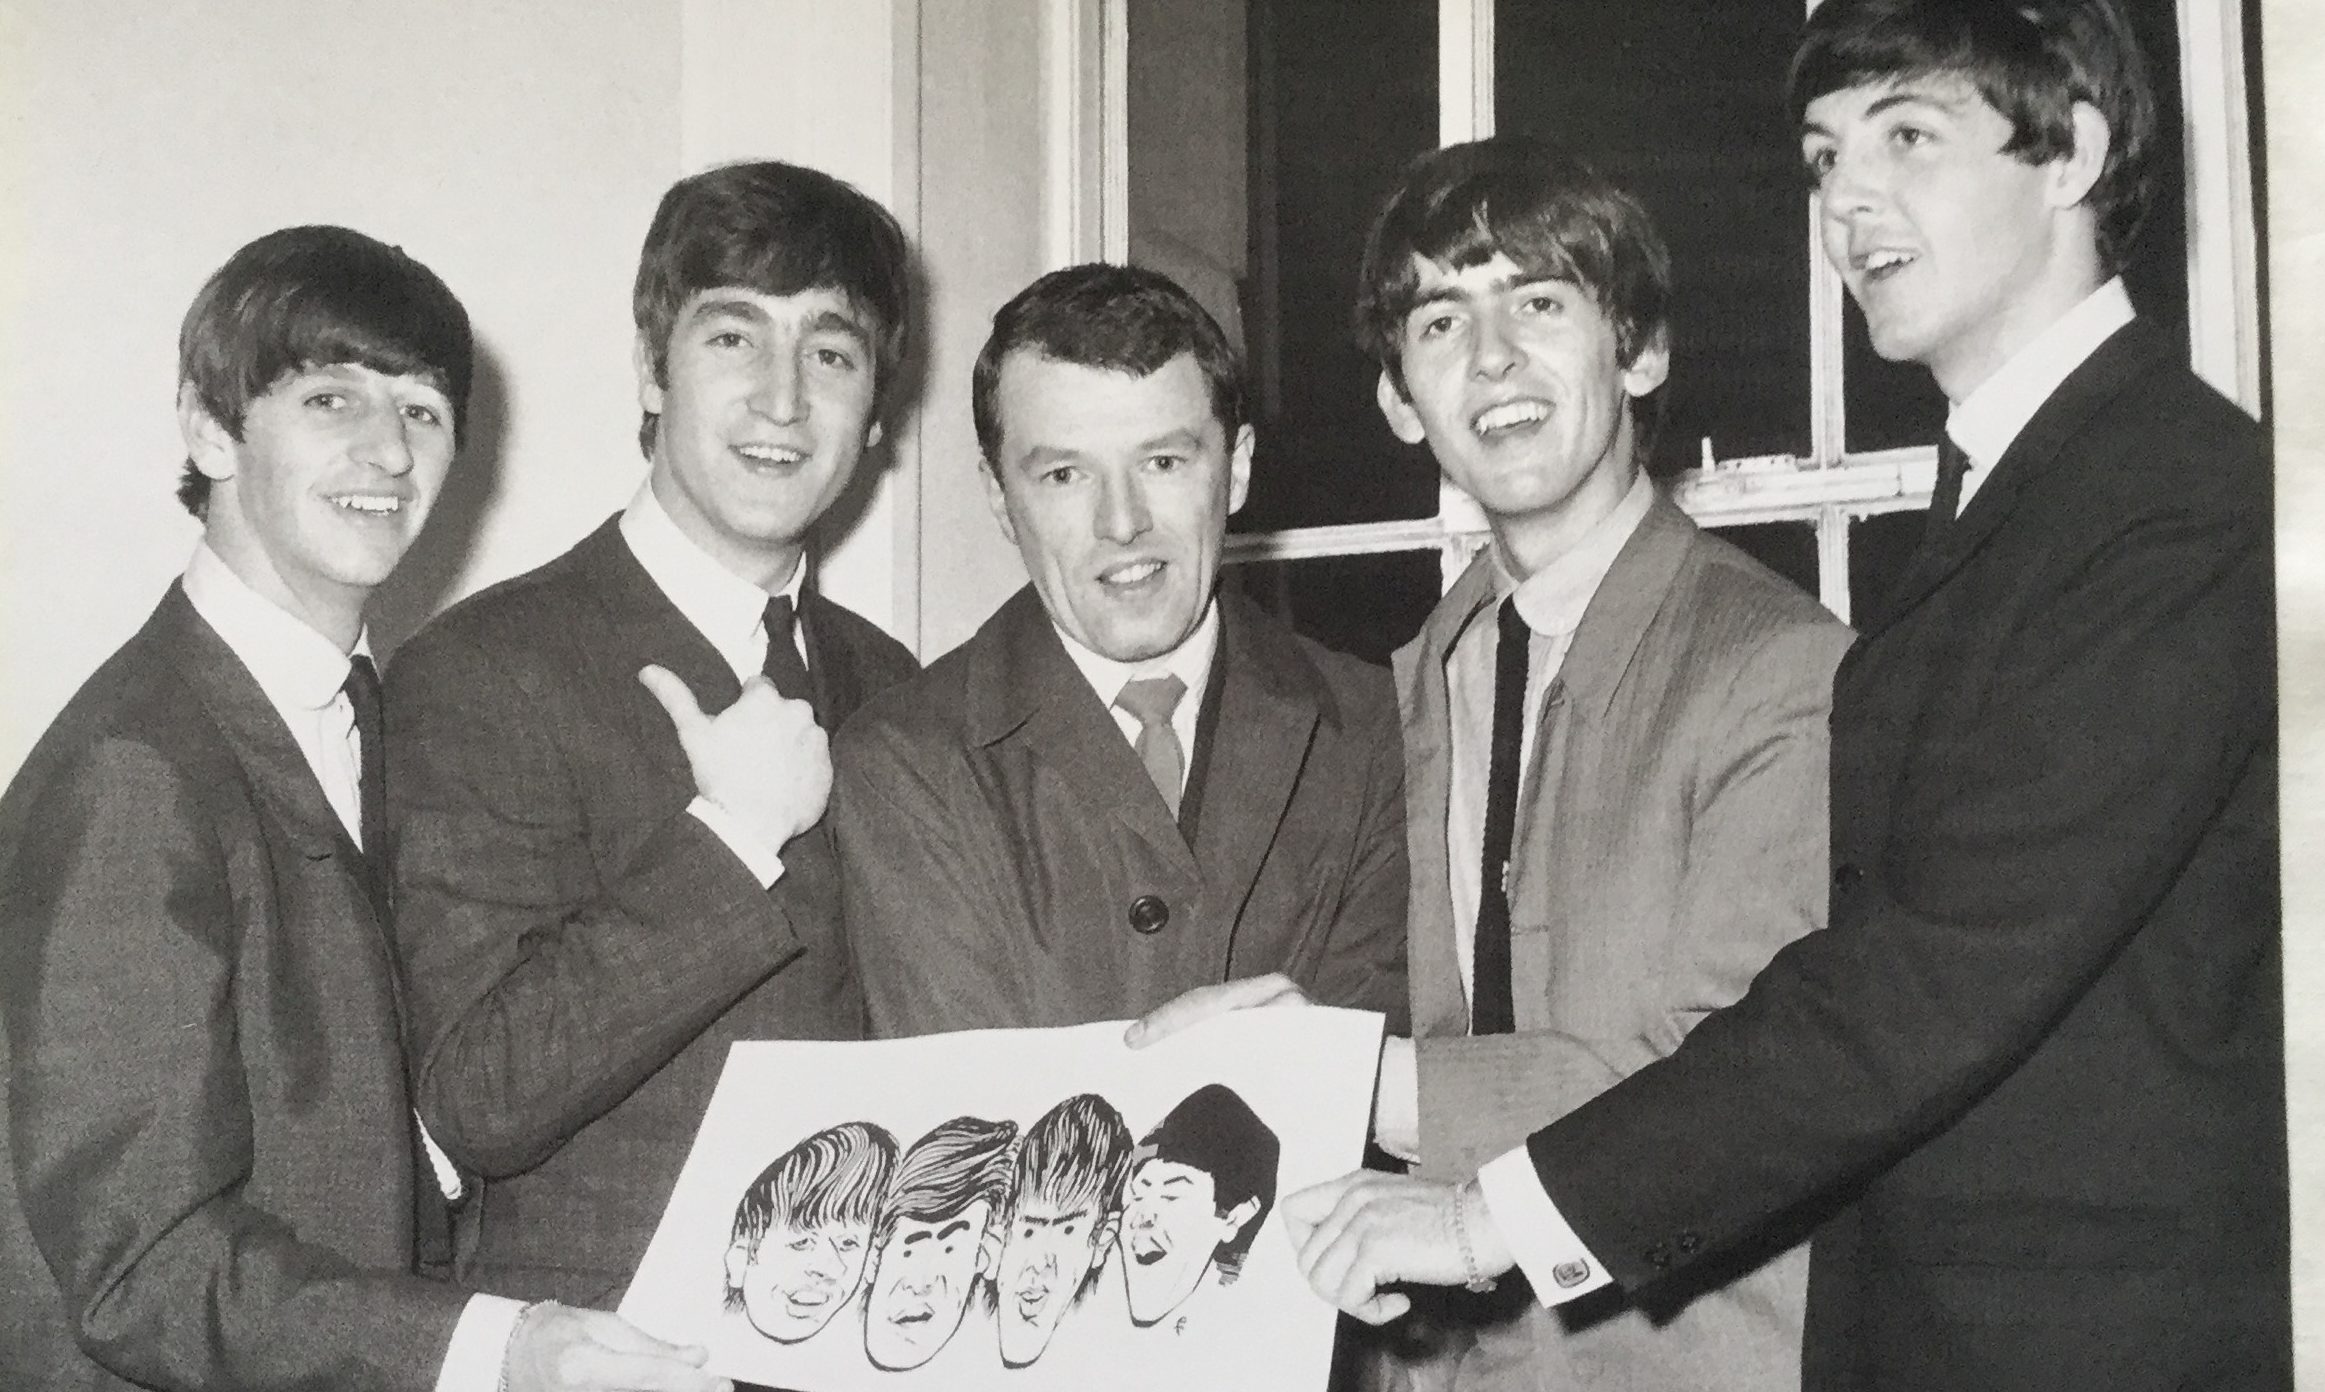 Artist Fraser Elder with the Fab Four in 1963.